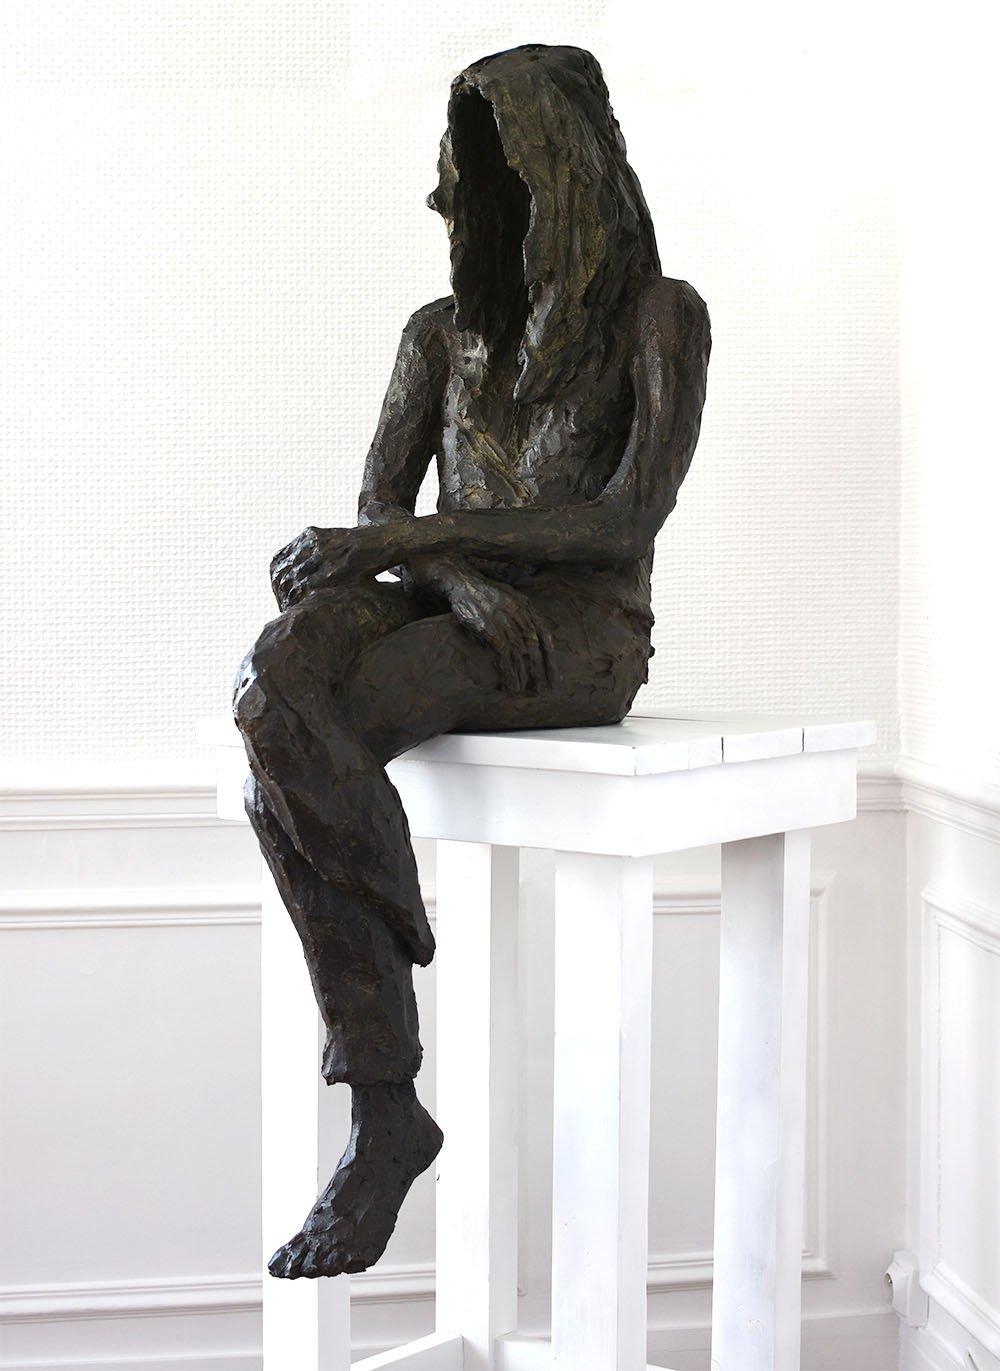 Girl’s dream by Cécile Raynal - Woman's figure sculpture, bronze, absence